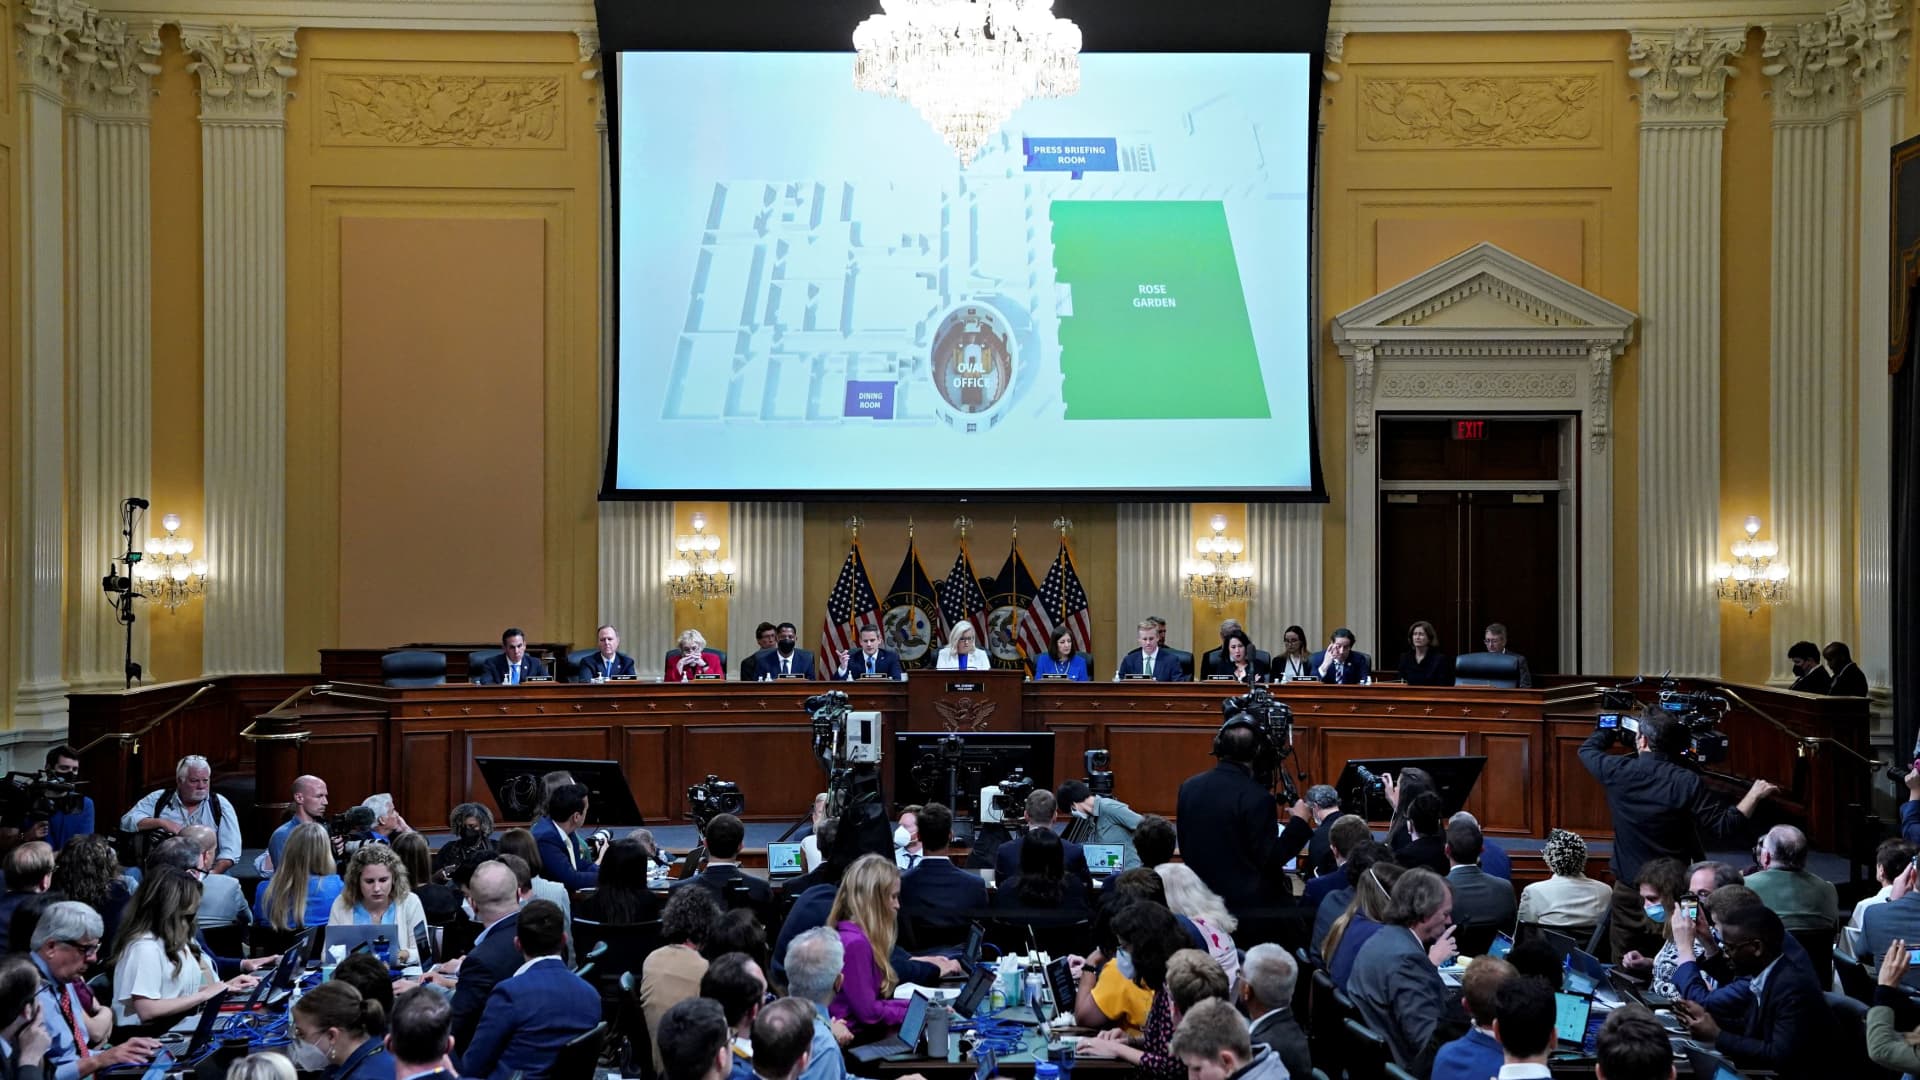 A diagram of the Oval Office of the White House and grounds displayed on a screen during a hearing of the Select Committee to Investigate the January 6th Attack on the US Capitol in Washington, D.C., US, on Thursday, July 21, 2022. 